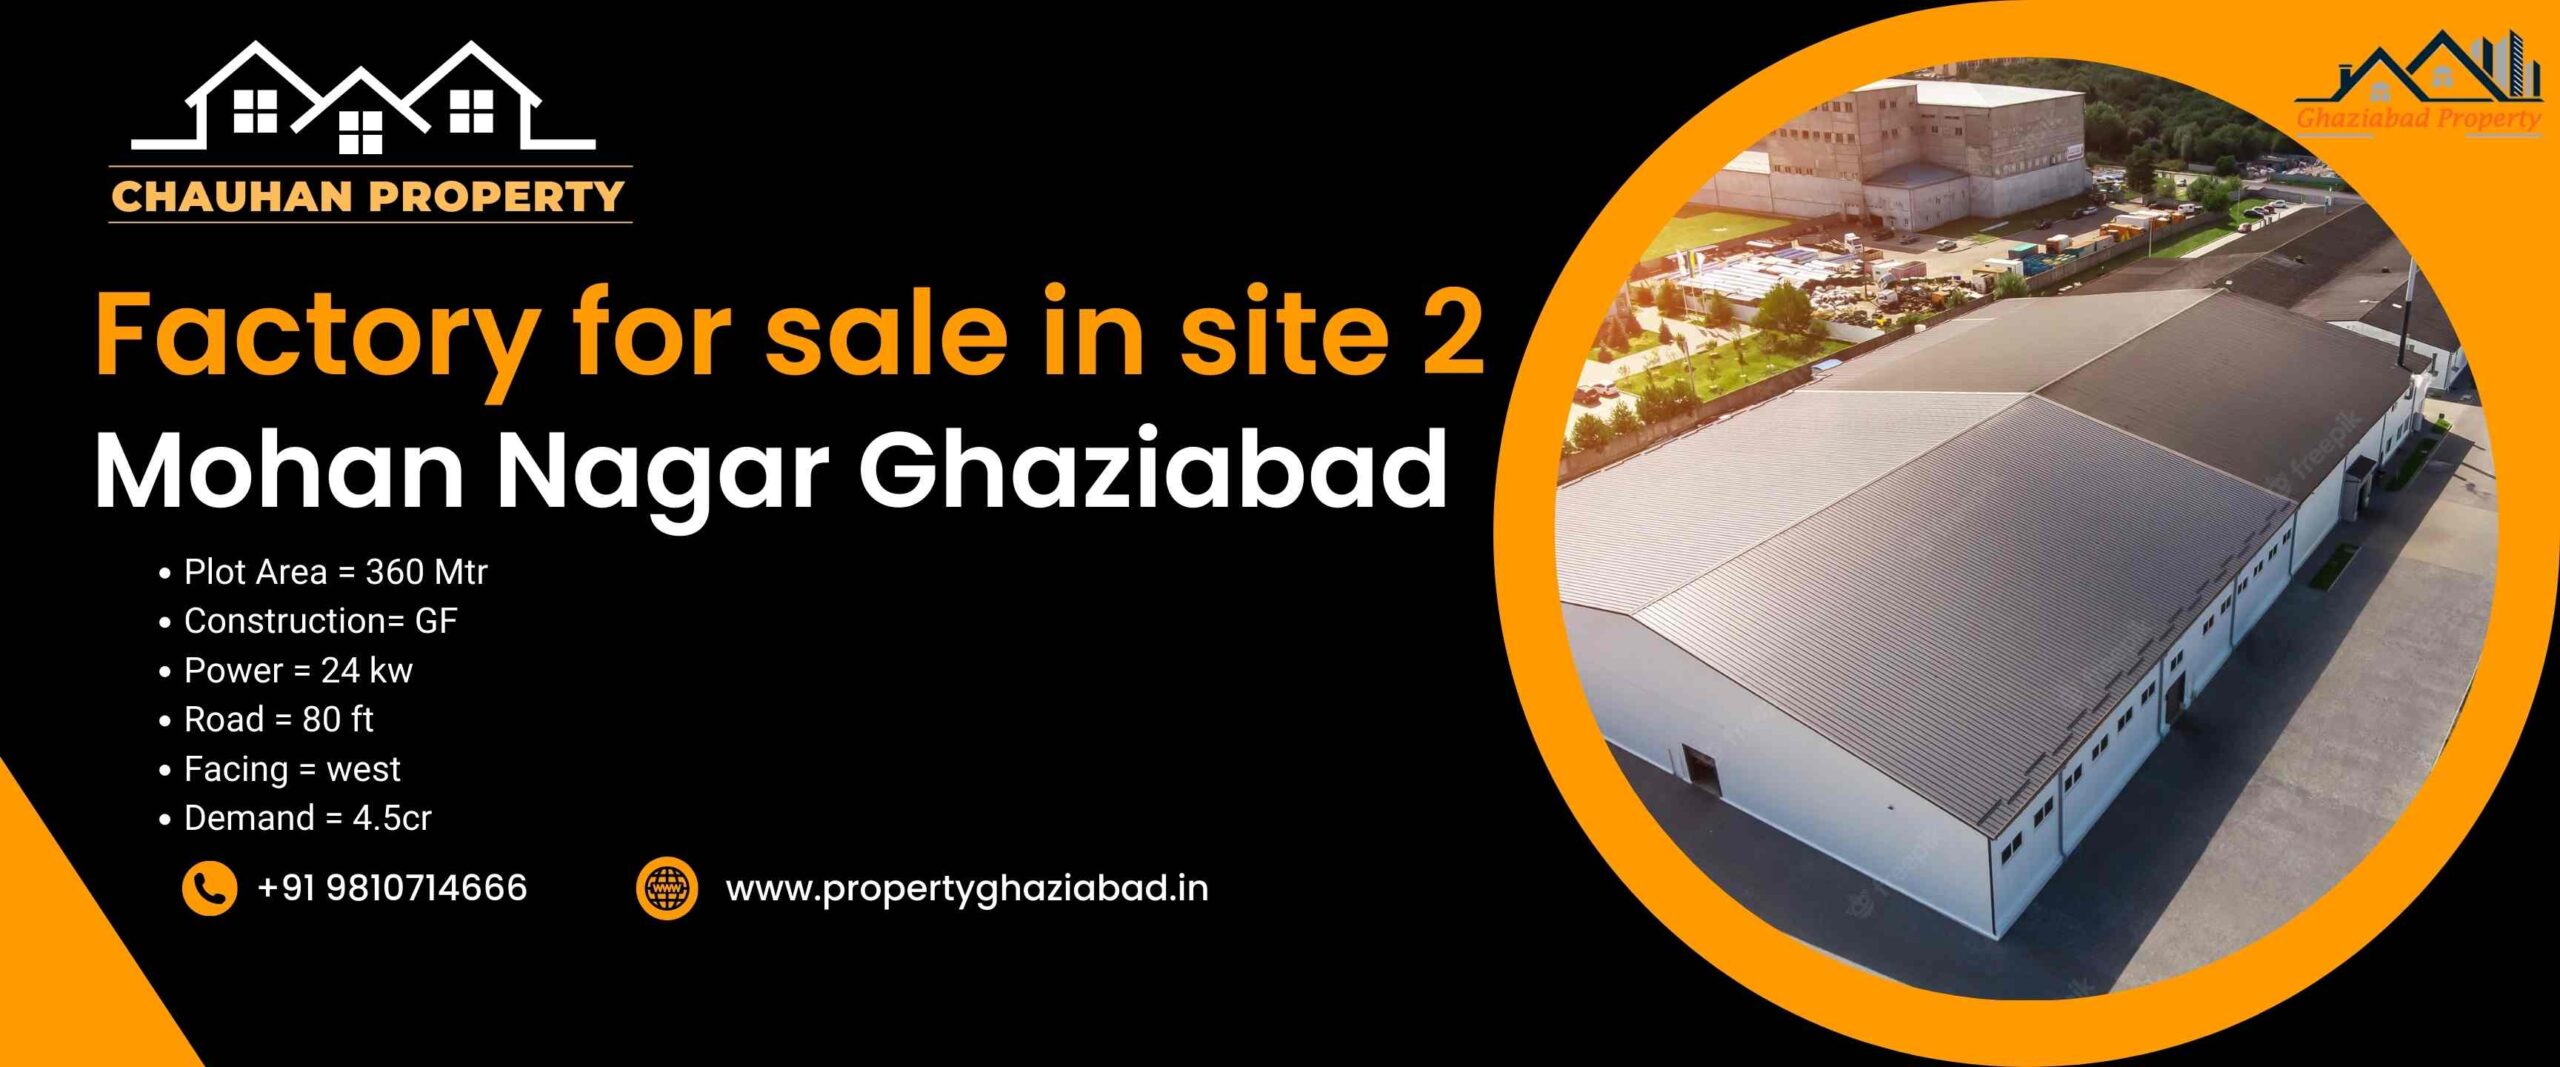 Industrial Property for Sale – Factory for Sale in Site 2 Mohan Nagar Ghaziabad